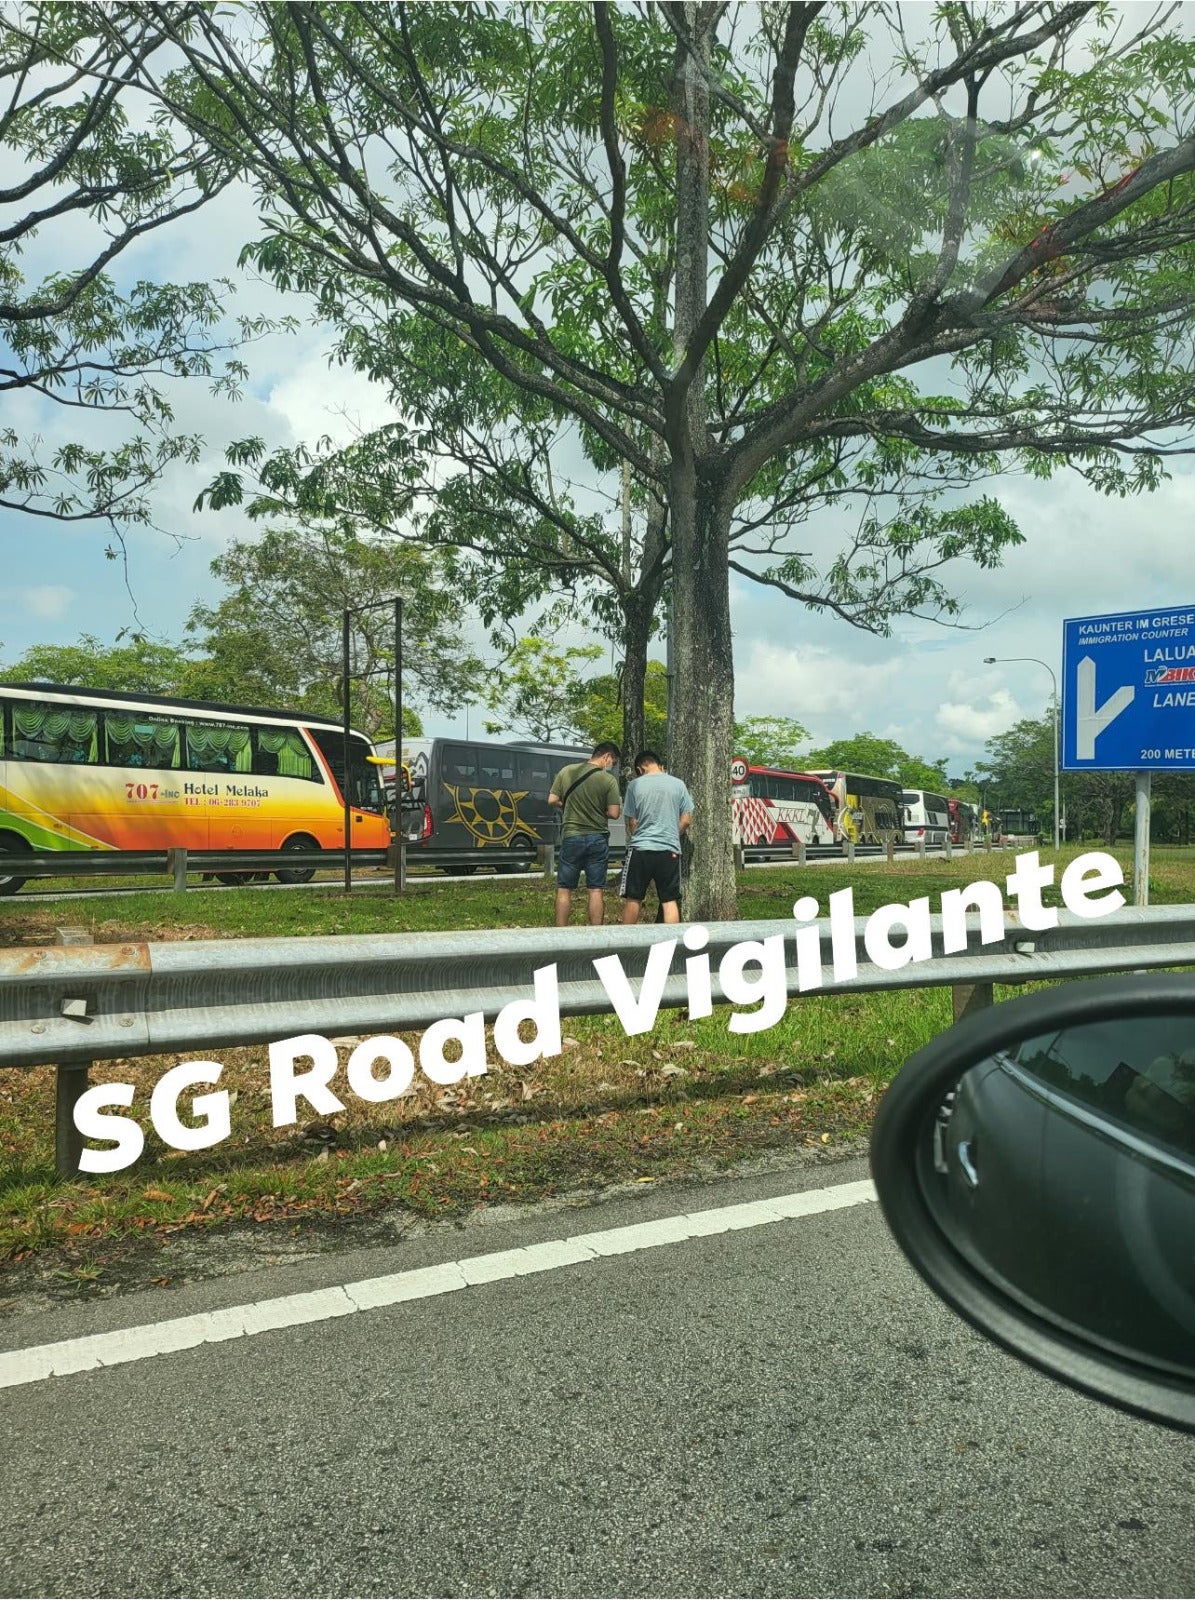 two men pee road side bus singapore malaysia 2nd link 1 scaled